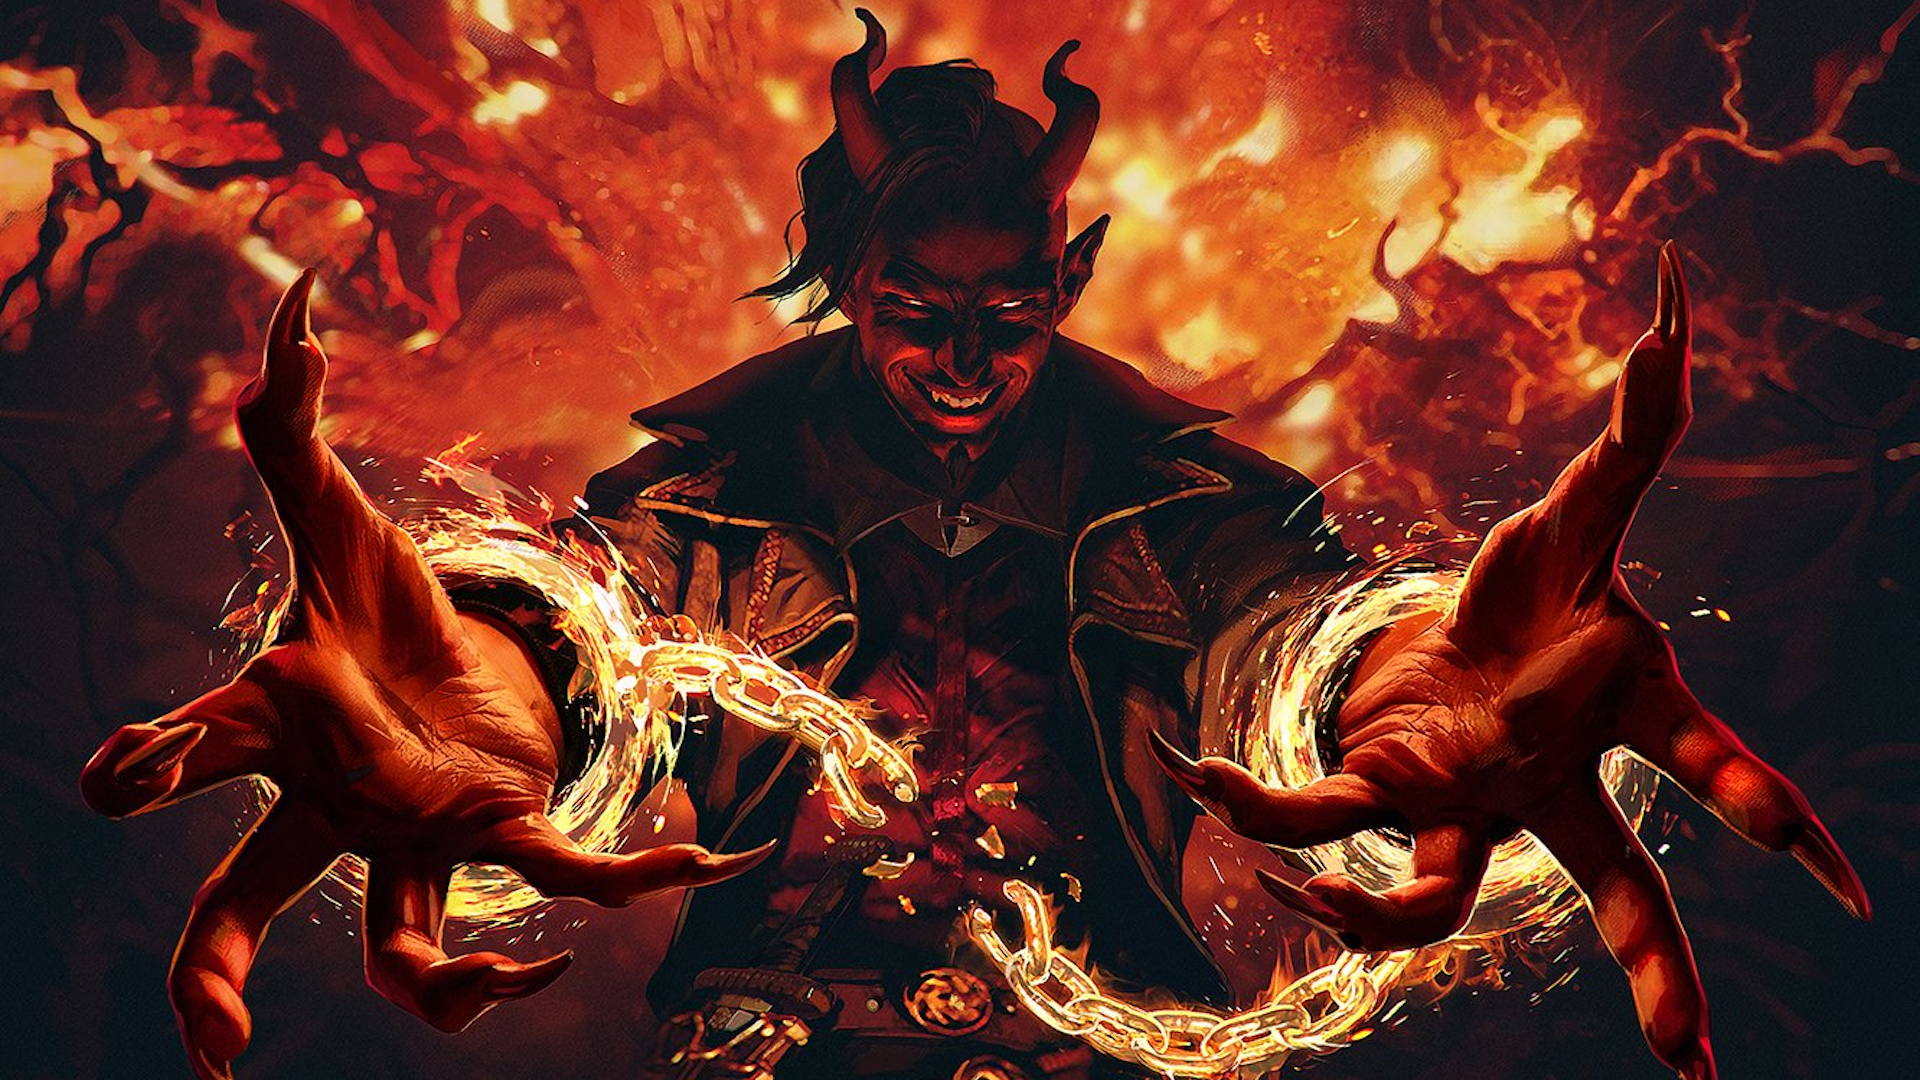 Card art for Tibalt's Trickery from Kaldheim. The planeswalker Tibalt stands in front of a fiery background as he burns a pair of manacles off of his wrists, smiling wickedly.